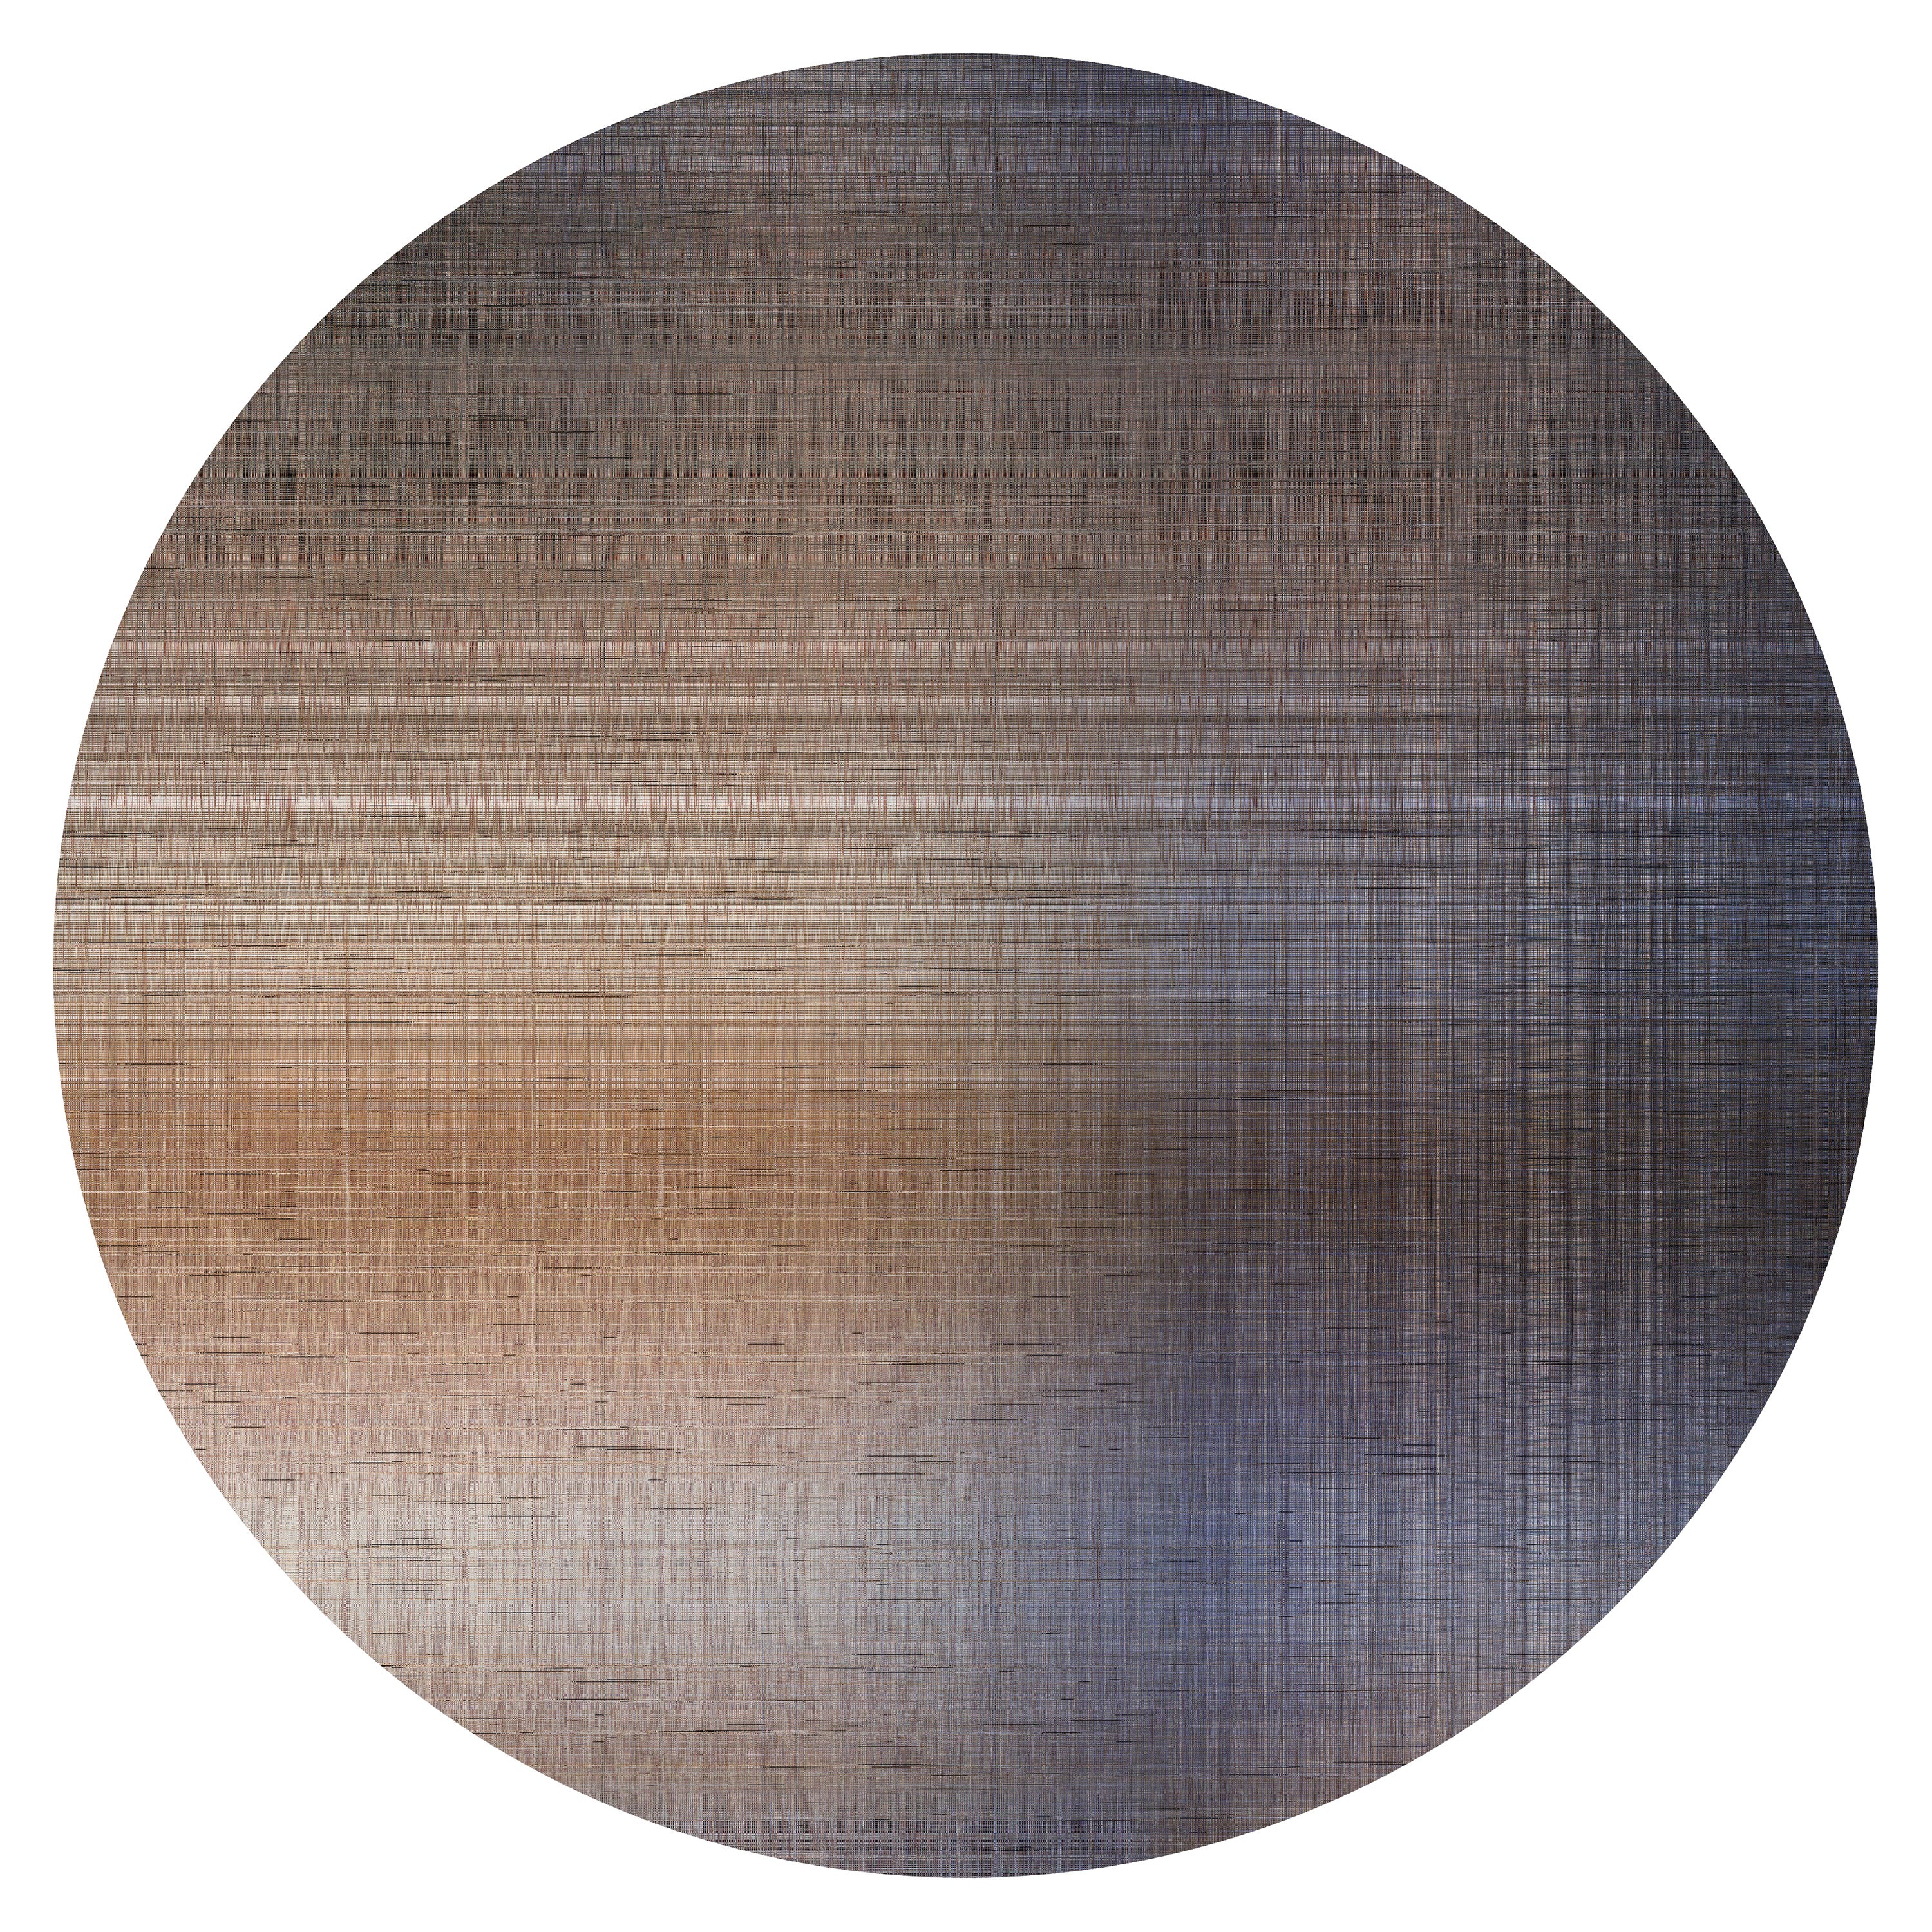 Moooi Small Quiet Canvas Denim Round Rug in Wool with Blind Hem Finish